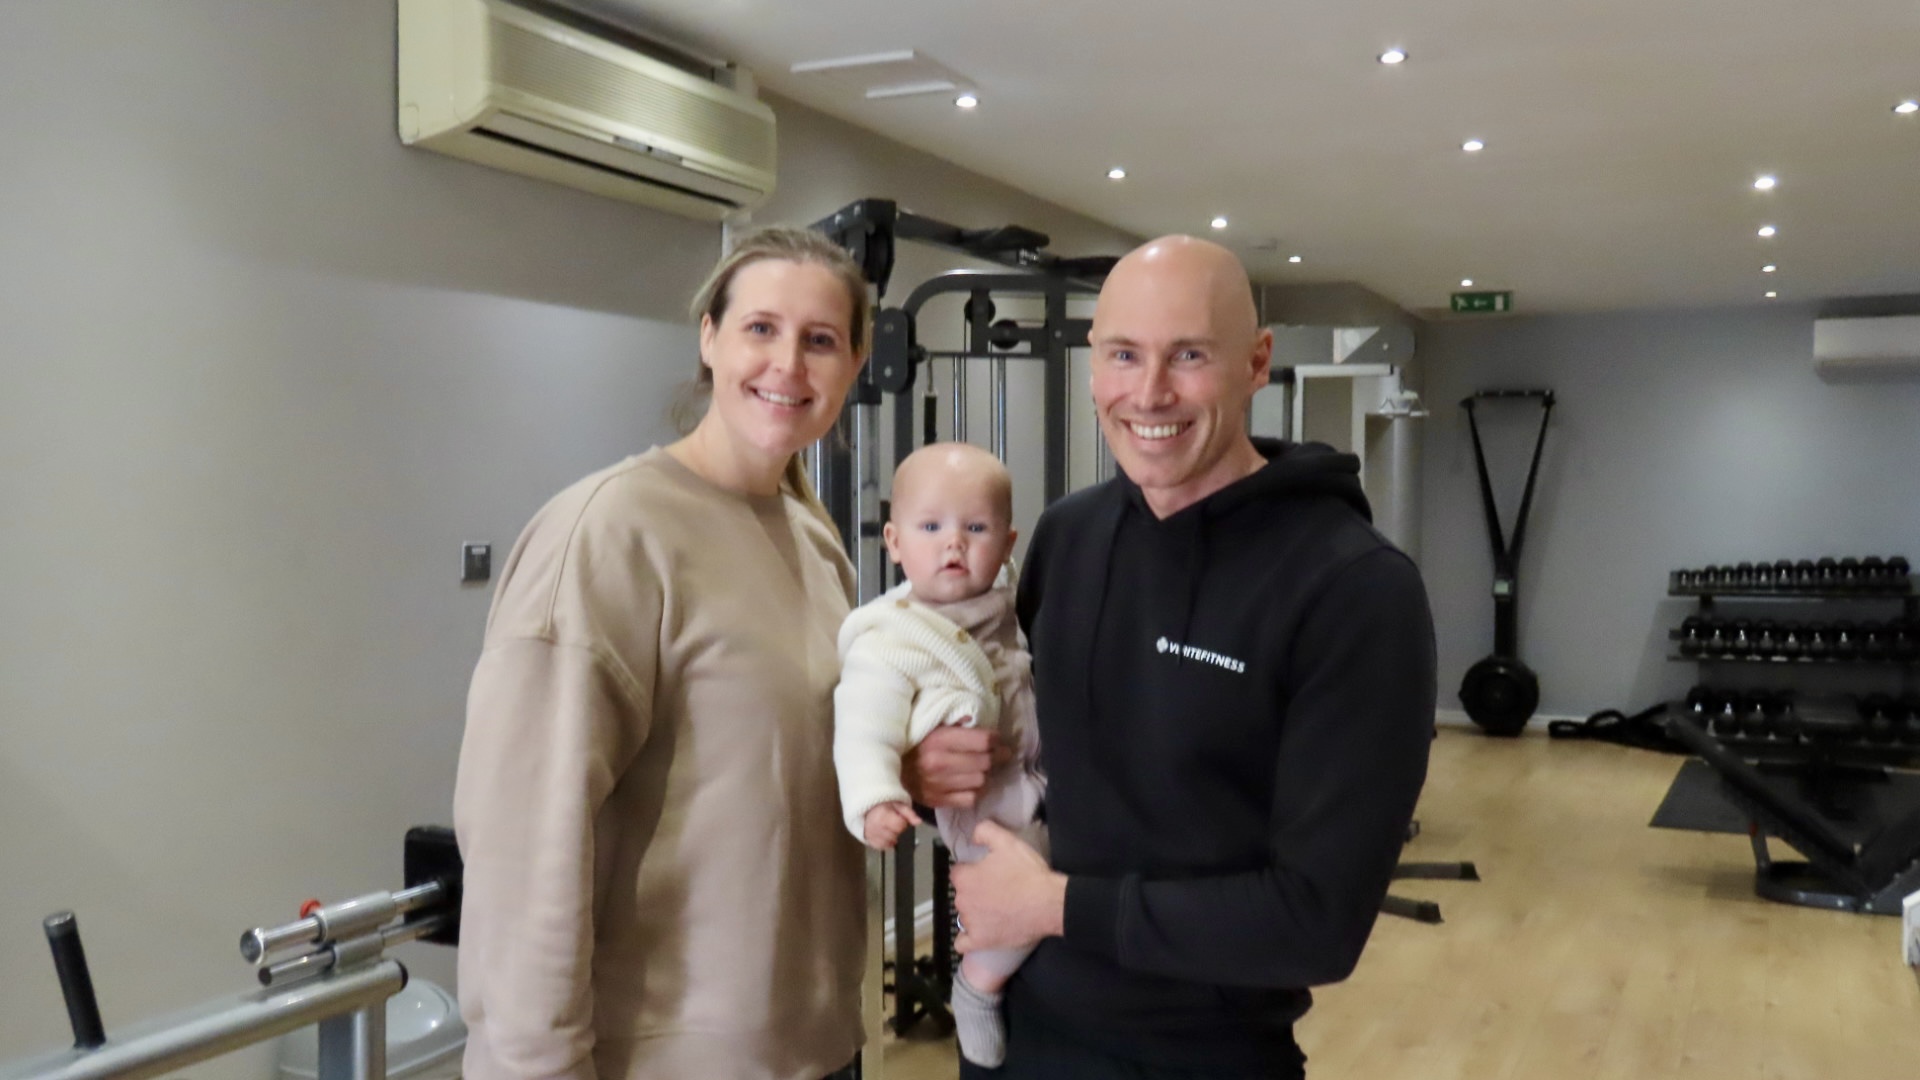 Verite Fitness and Beauty, a family-run venue in Southport, is celebrating its 10th anniversary. It?s opened by local couple Christian and Emma Verite. Photo by Andrew Brown Stand Up For Southport